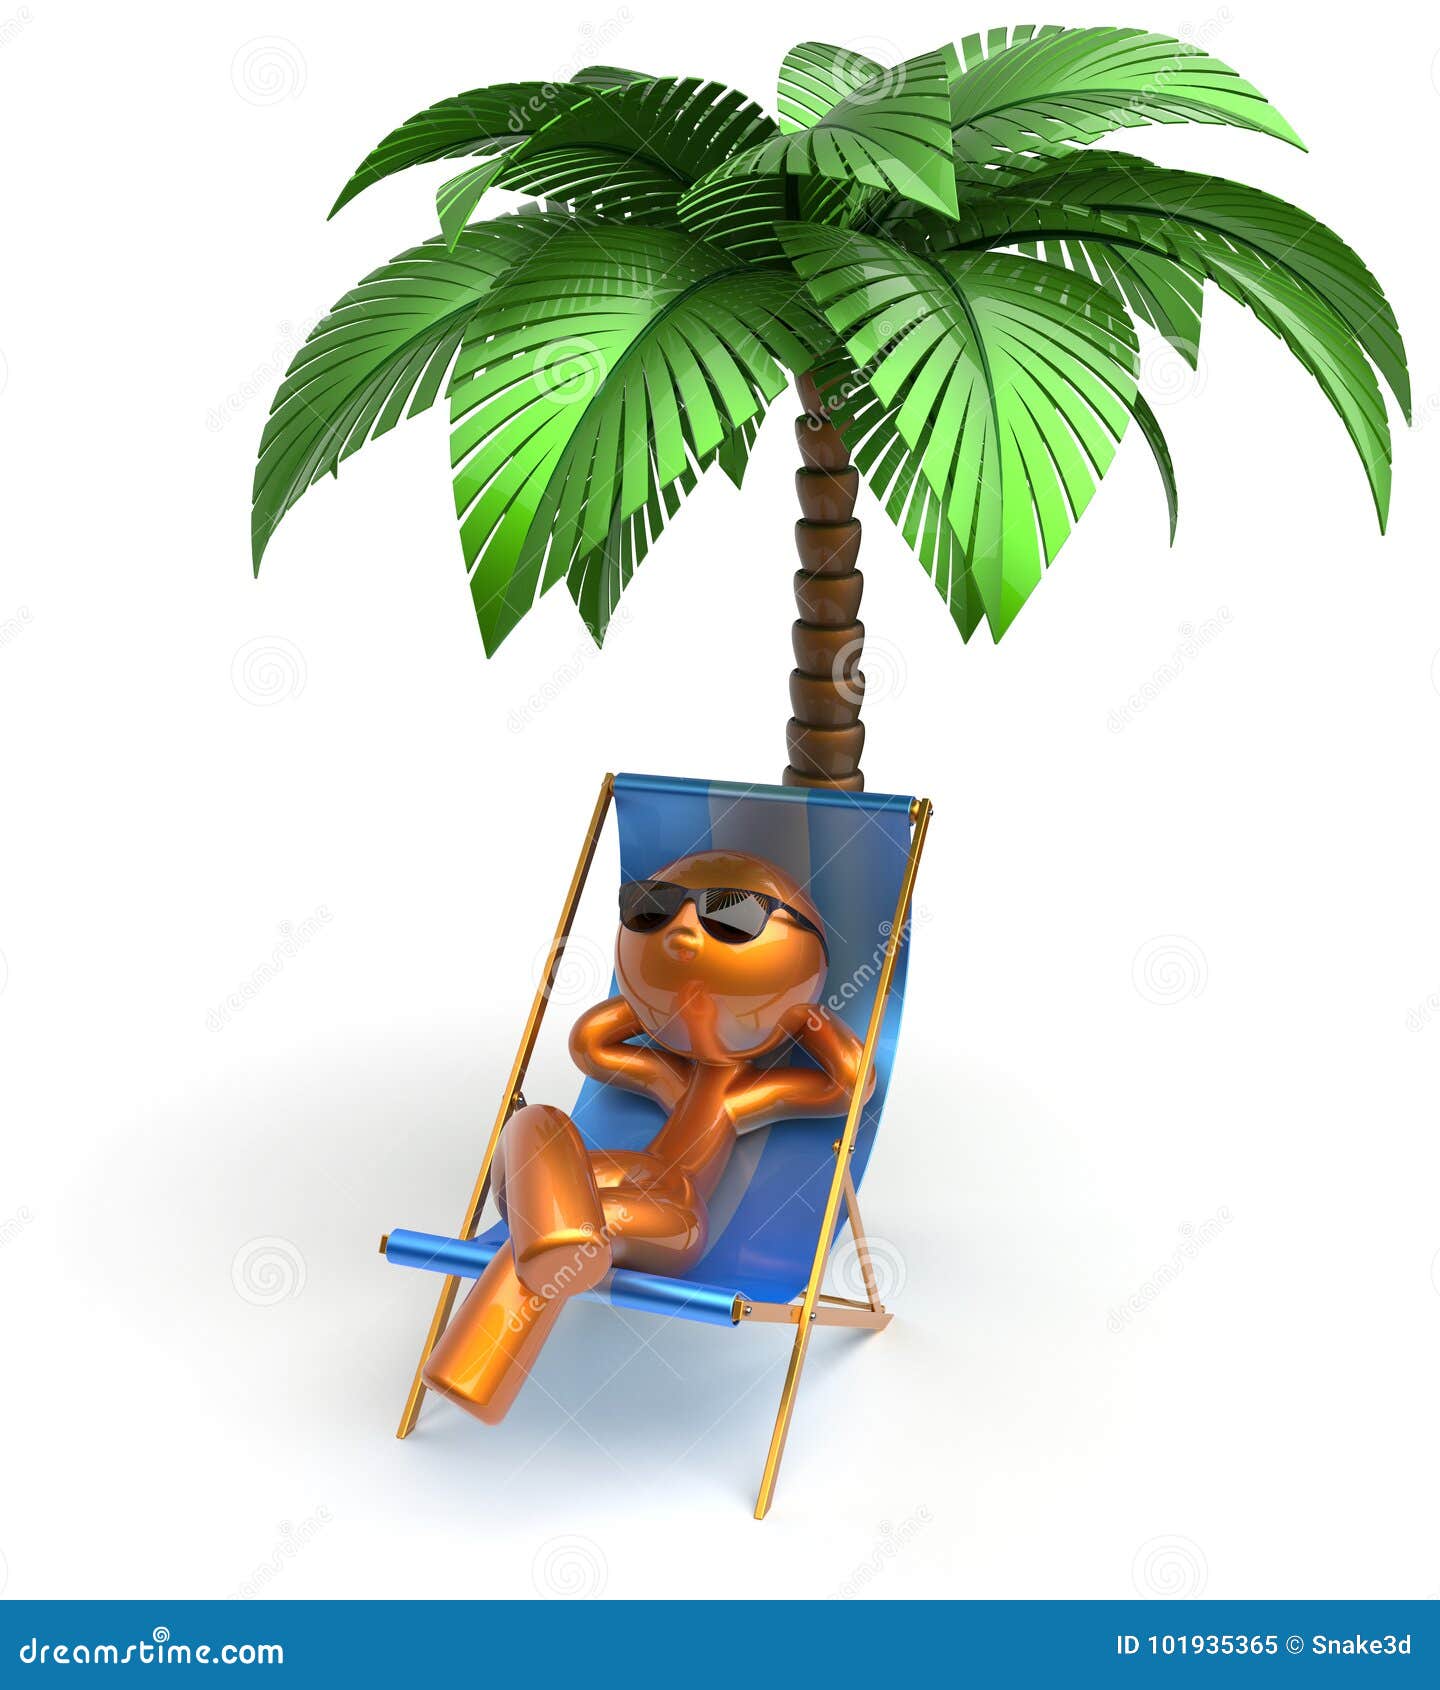 Cartoon Character Chilling Beach Deck Chair Man Relaxing Stock Illustration  - Illustration of paradise, chilling: 101935365